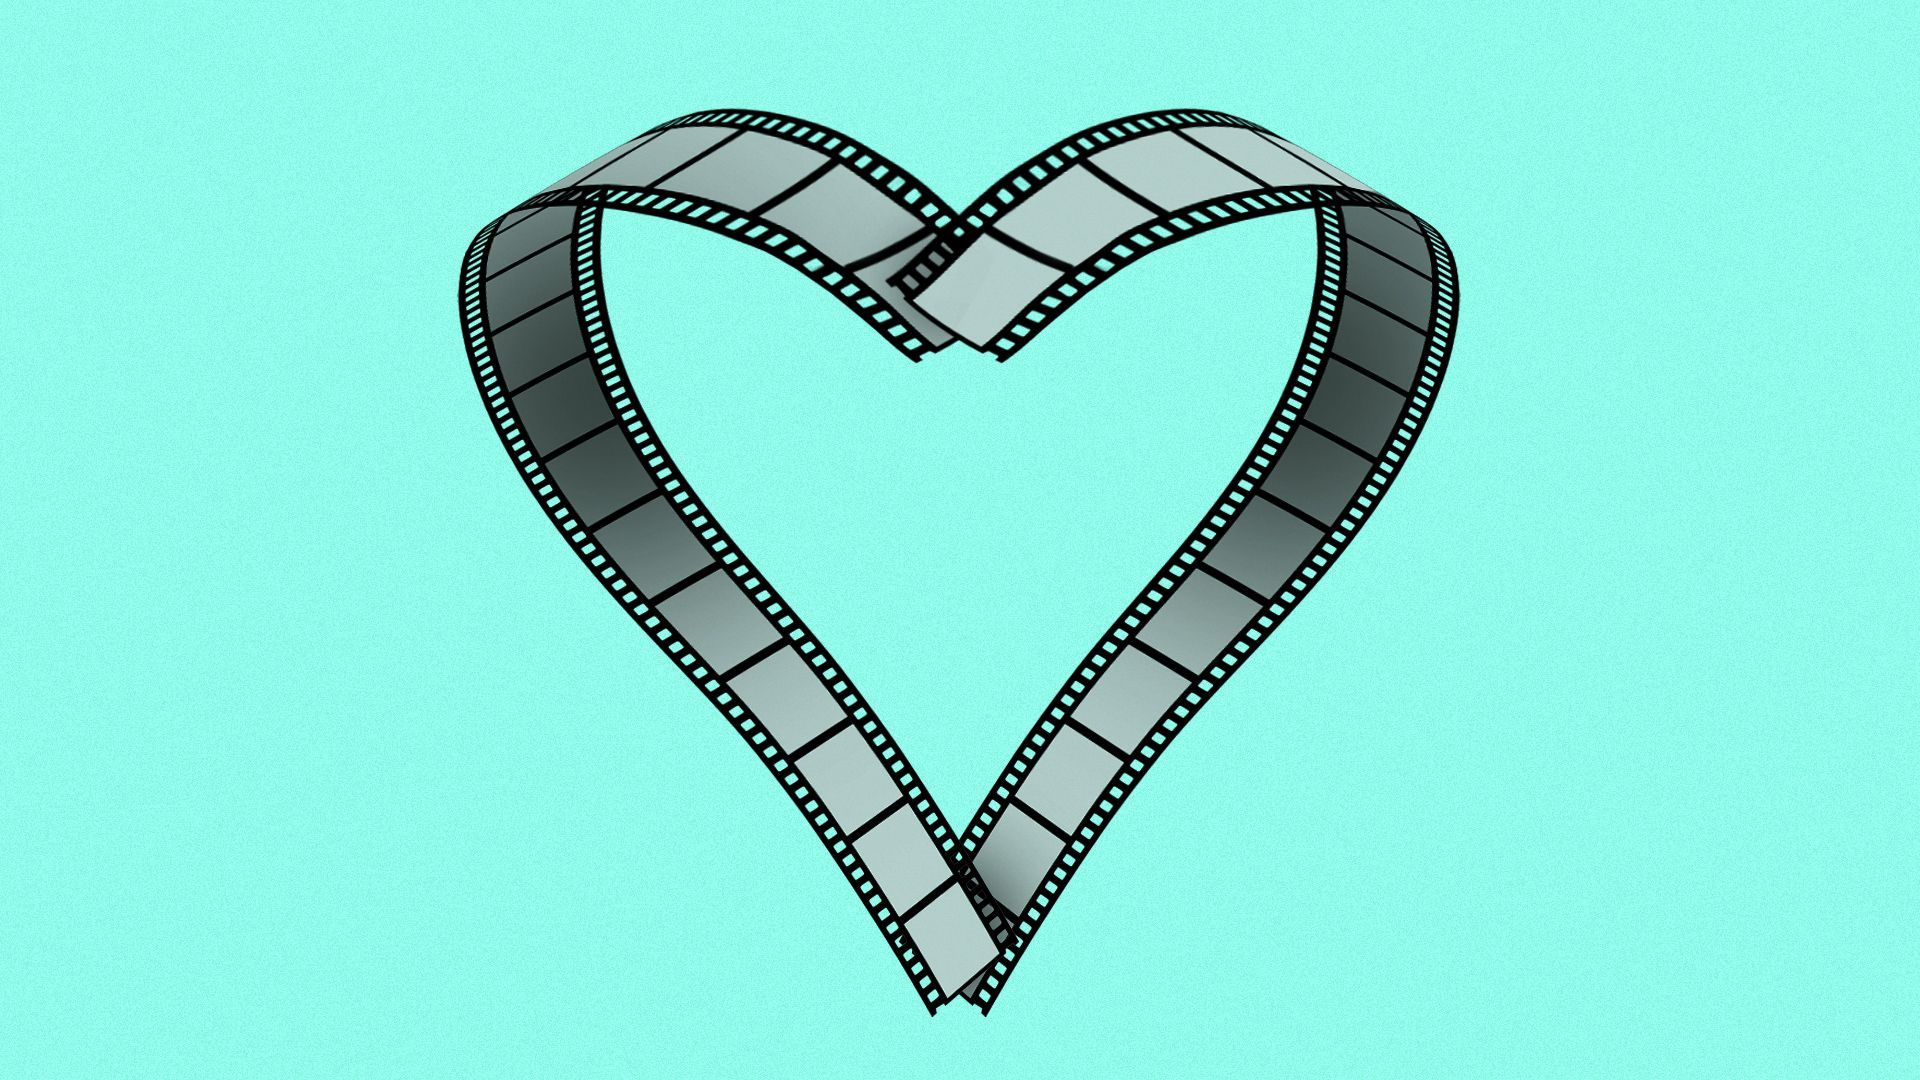 Illustration of film reel strips in the shape of a heart.